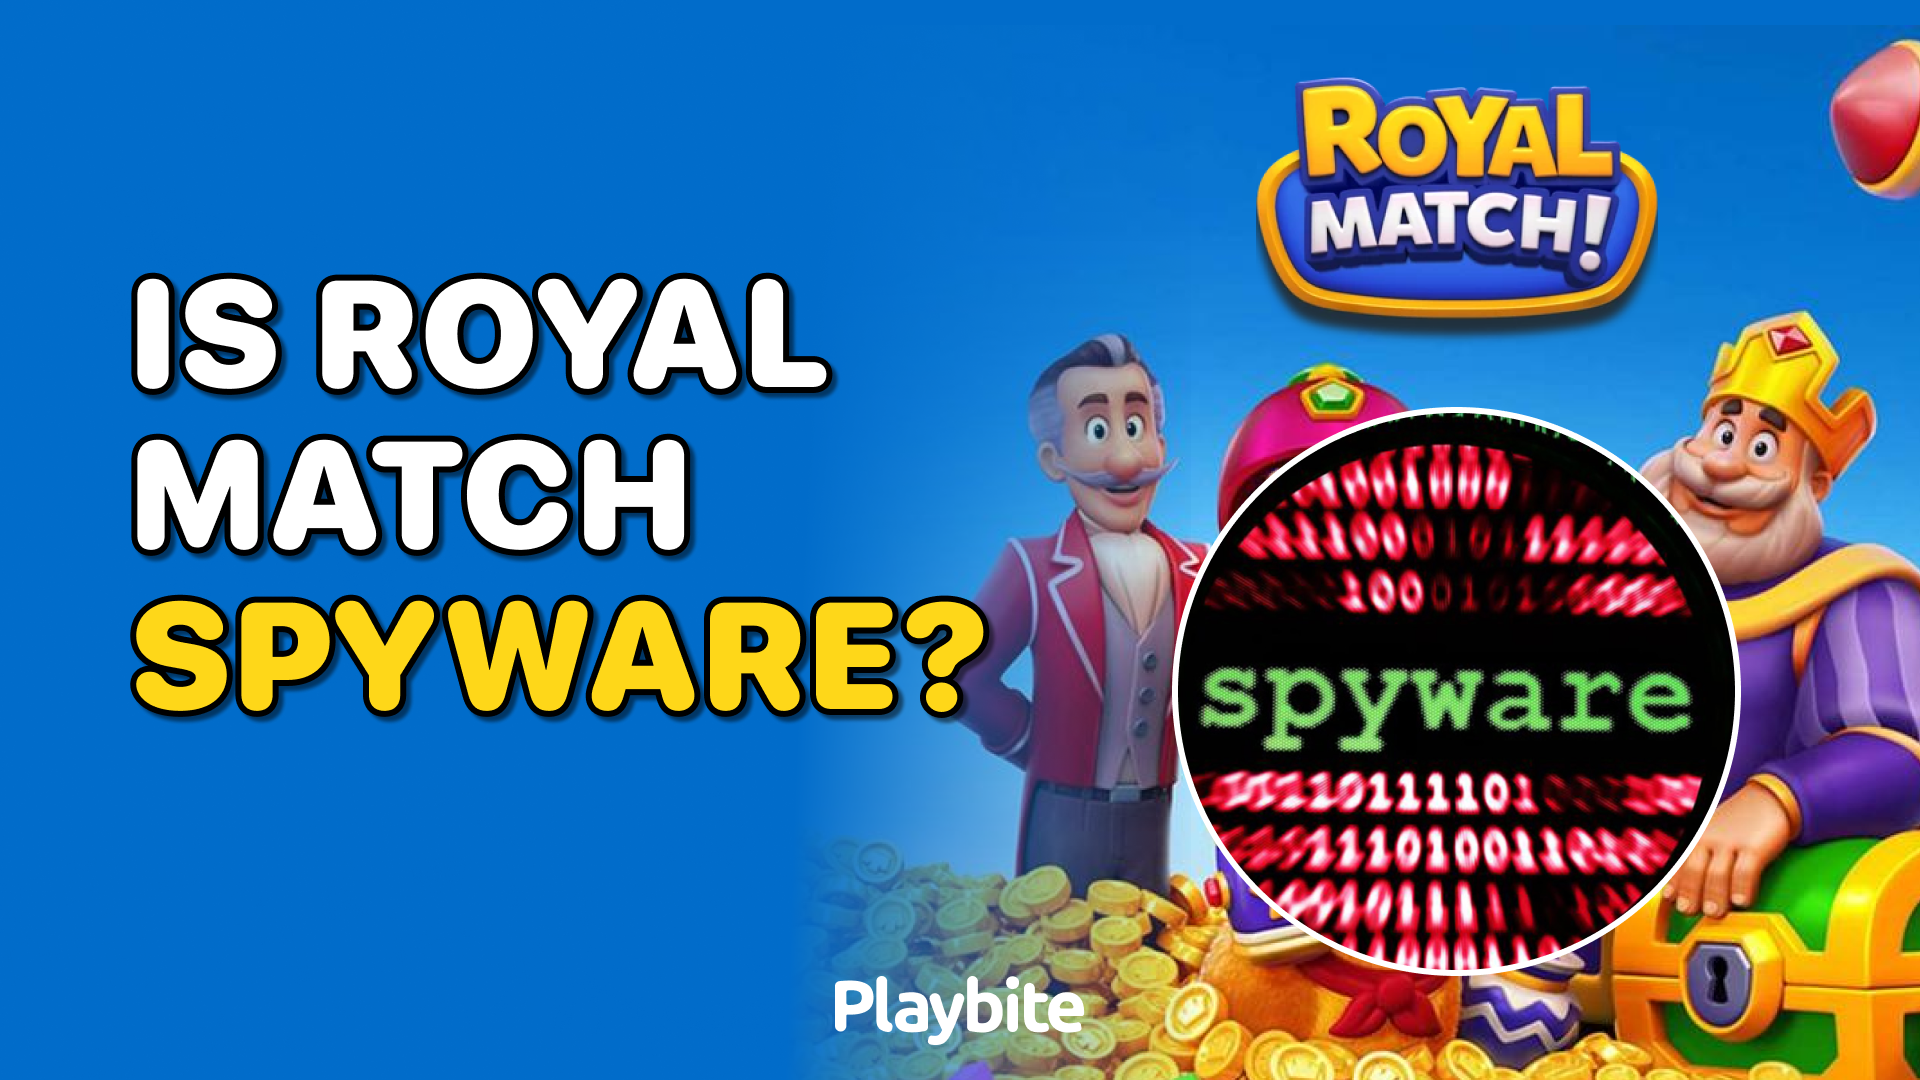 Is Royal Match Spyware?